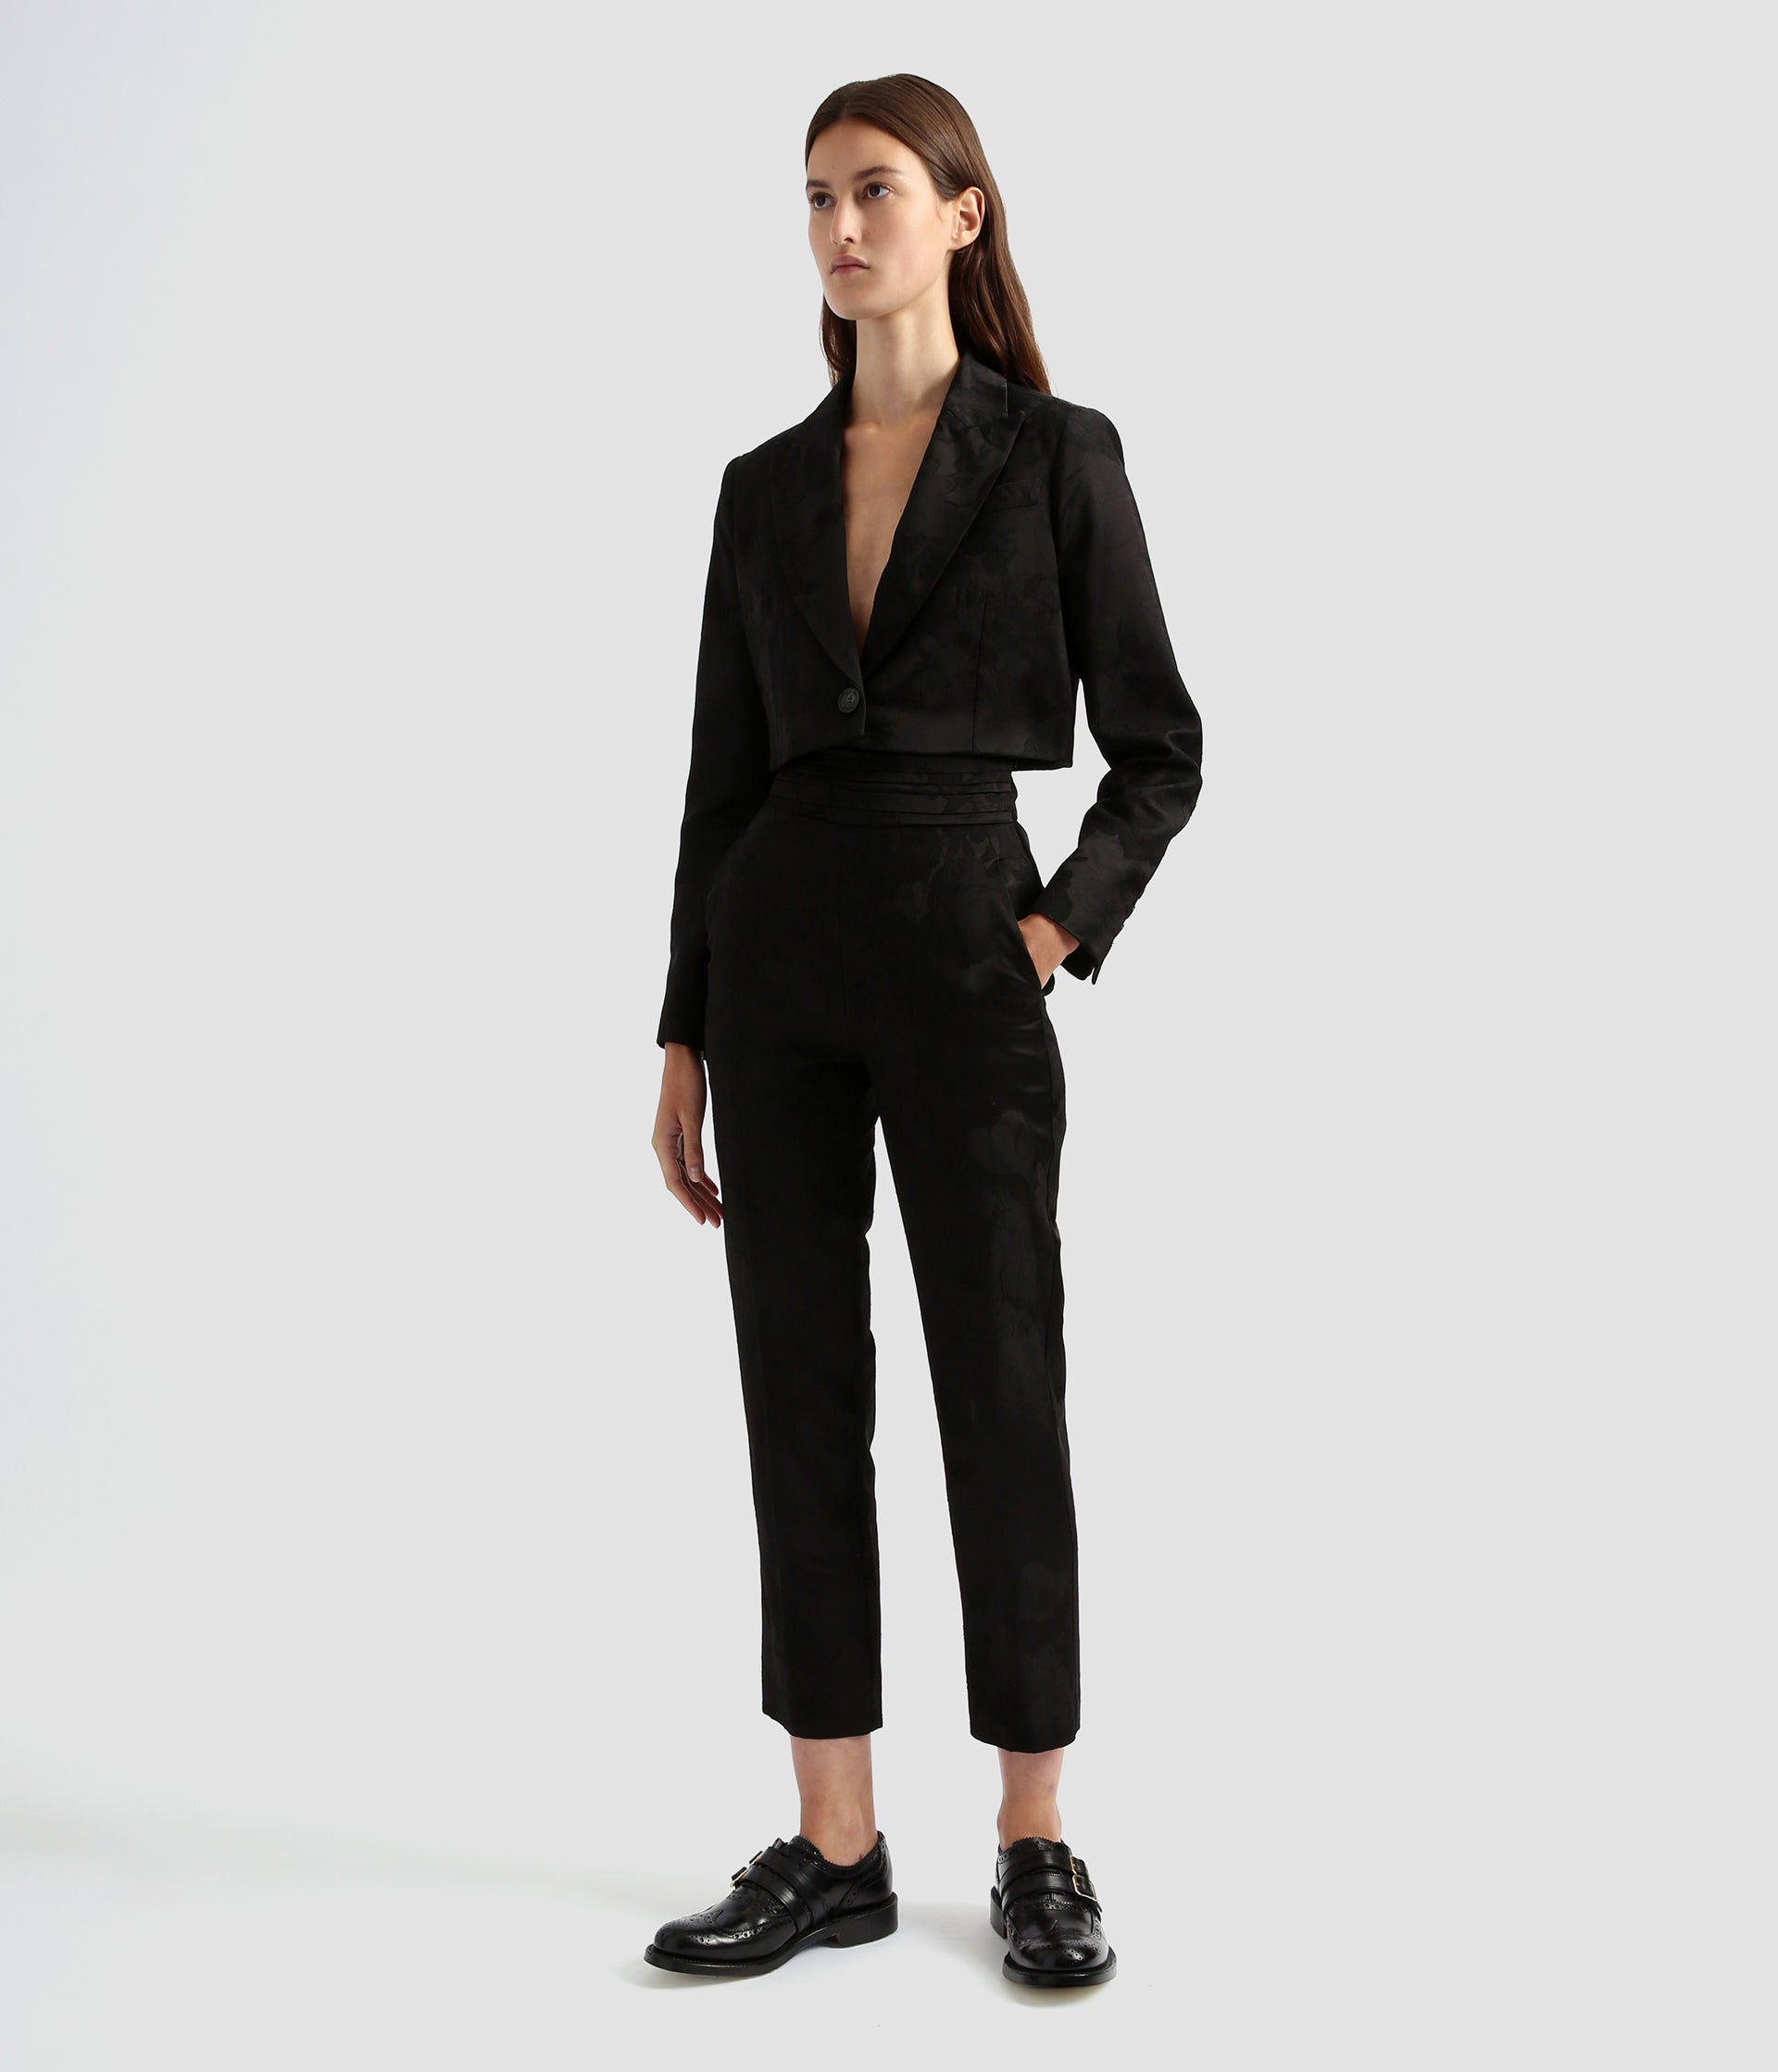 Tailored slim leg trousers for women by designer Erdem. The tailored trousers are crafted from a wool jacquard with a floral print. The tailored floral trousers are worn with a matching cropped boxy blazer.